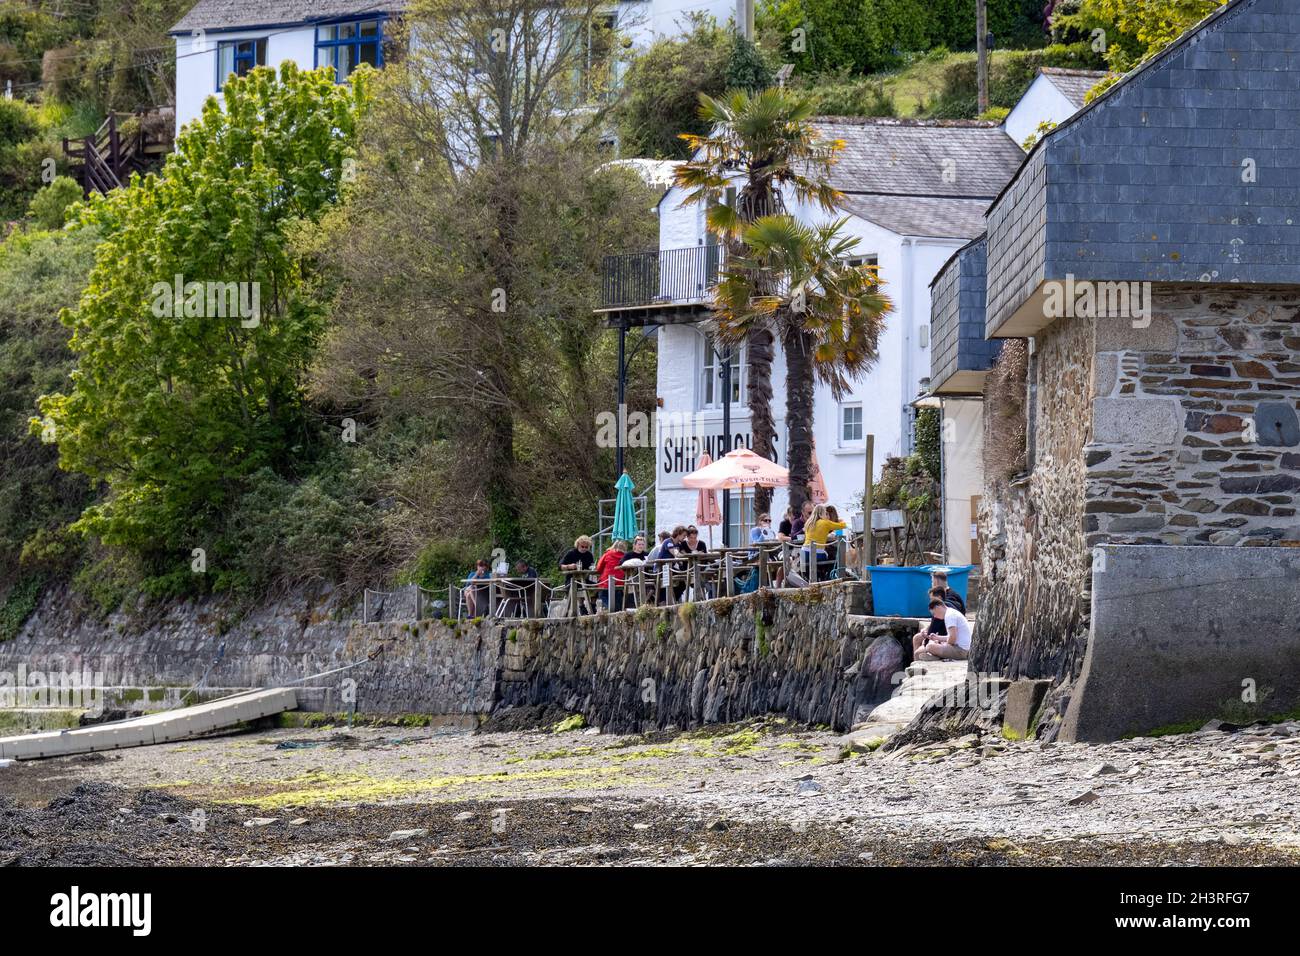 HELSTON, CORNWALL, UK - MAY 14 : People enjoying dining out at the Shipwright Arms in Helston, Cornwall on May 14, 2021. Unident Stock Photo